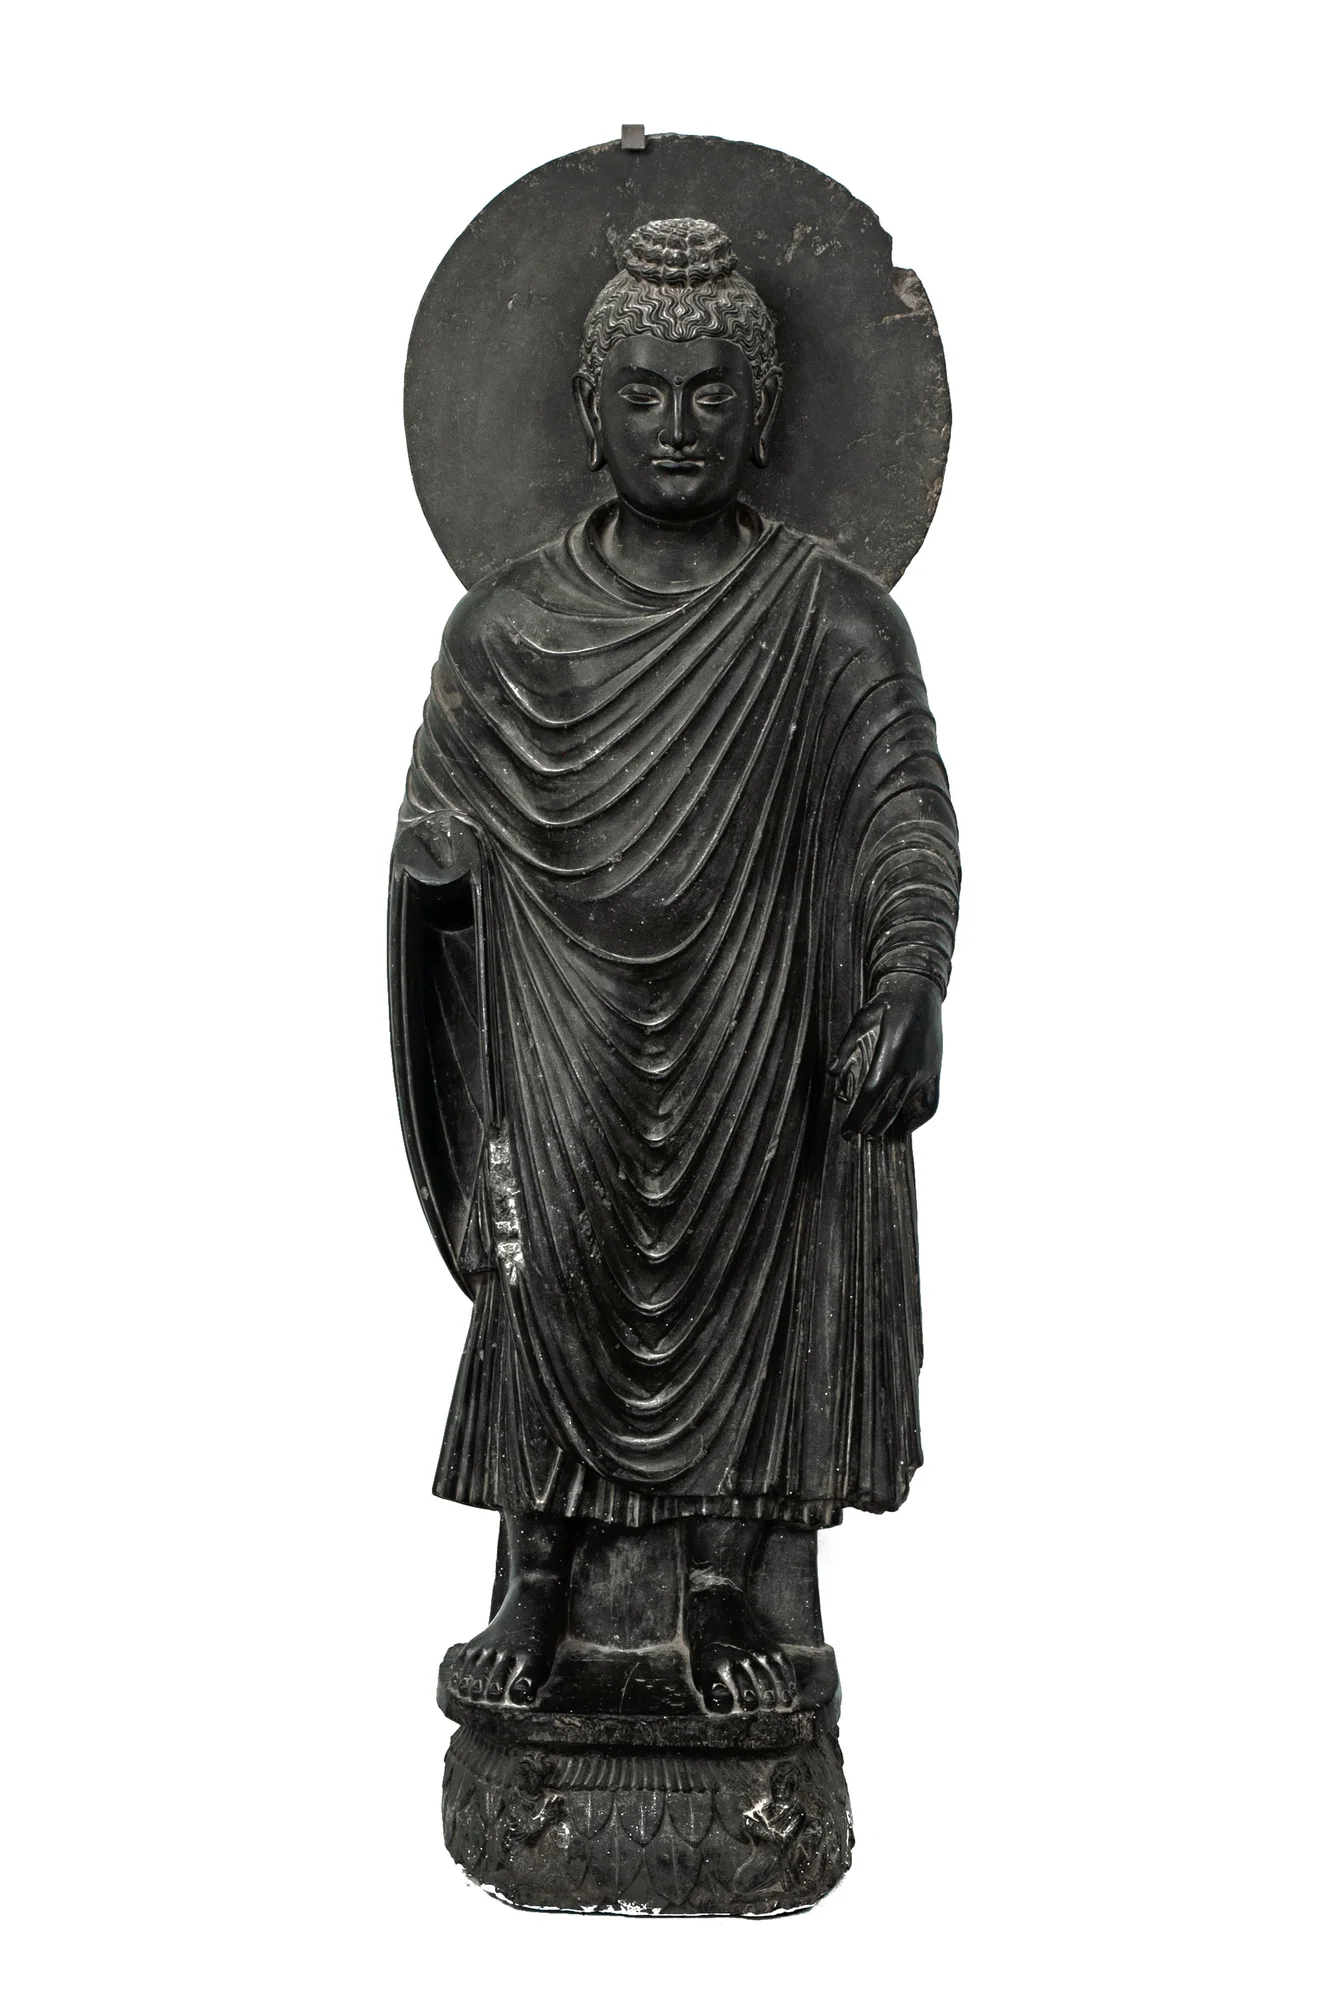 Color photograph of a dark grey statue of a person in a robe with their eyes closed, standing barefoot with a flat circle behind their head, against a white background.